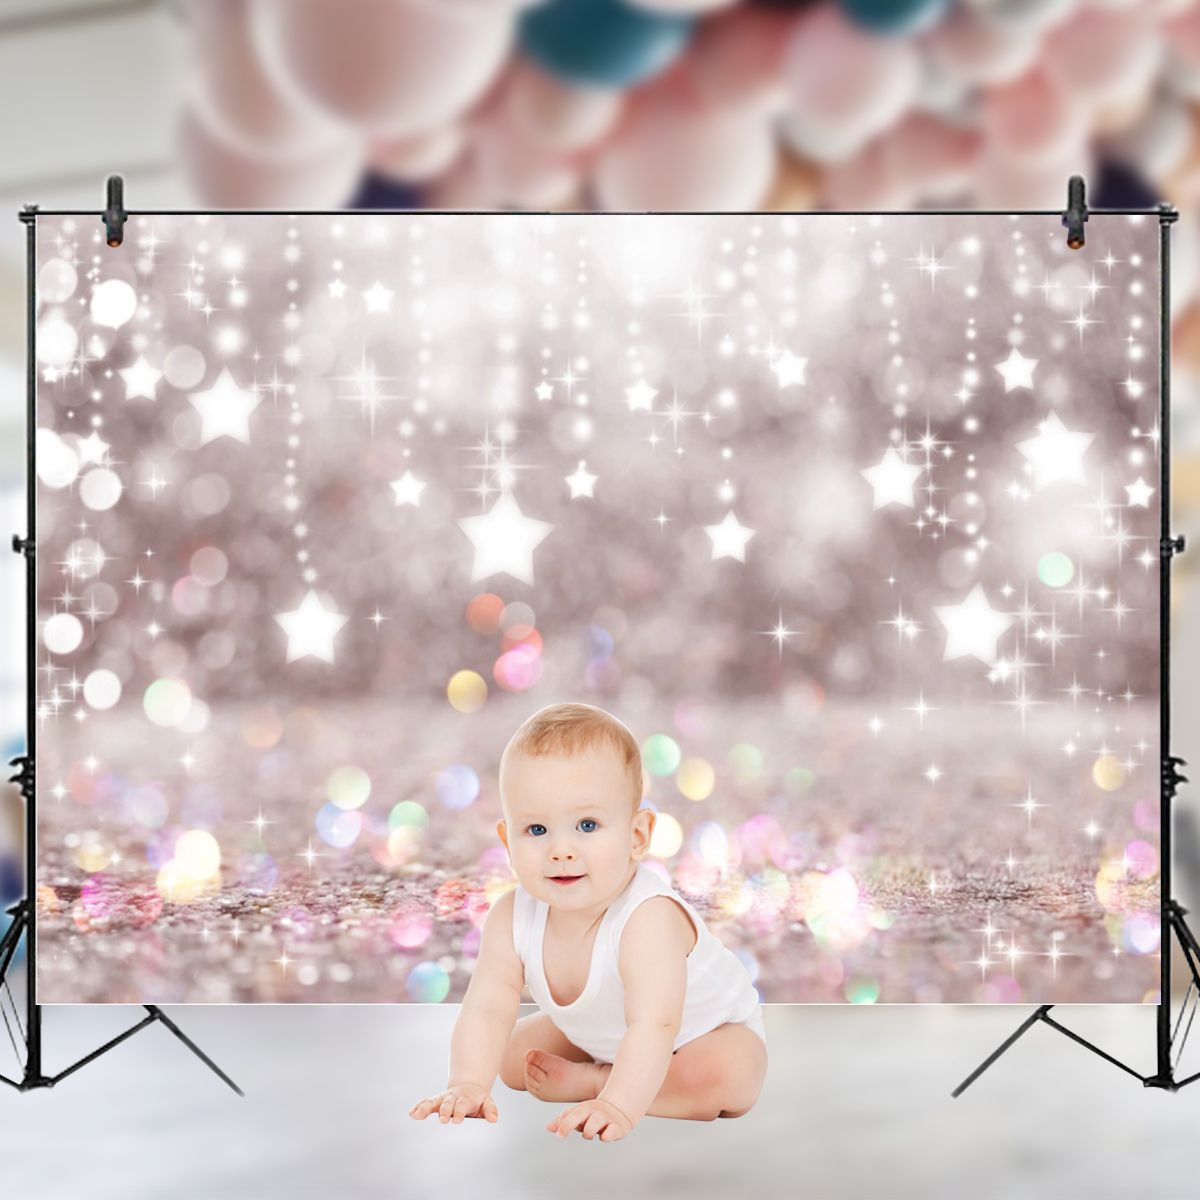 Dream-Star-Photography-Backdrop-Studio-Background-Cloth-Home-Party-Christmas-1717728